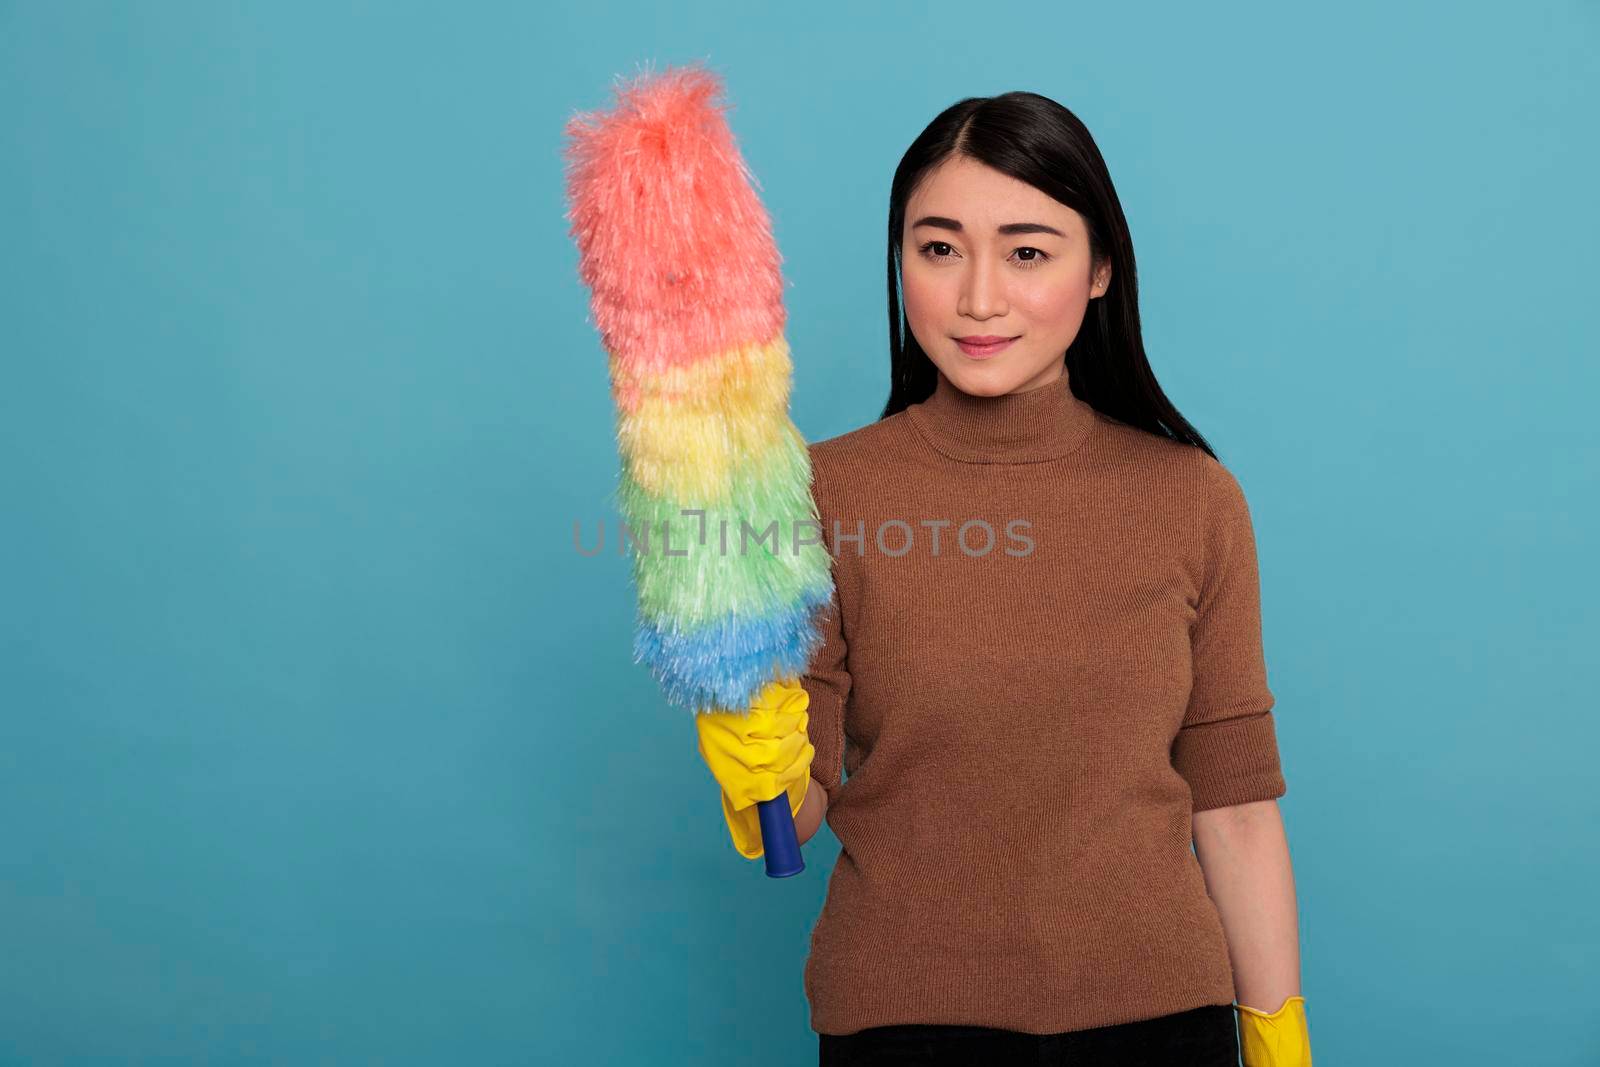 Delighted pleased asian housemaid from homework yellow rubber gloves holding dust brush isolated on a blue background, Cleaning home concept, Feeling Cheerful happy and positive